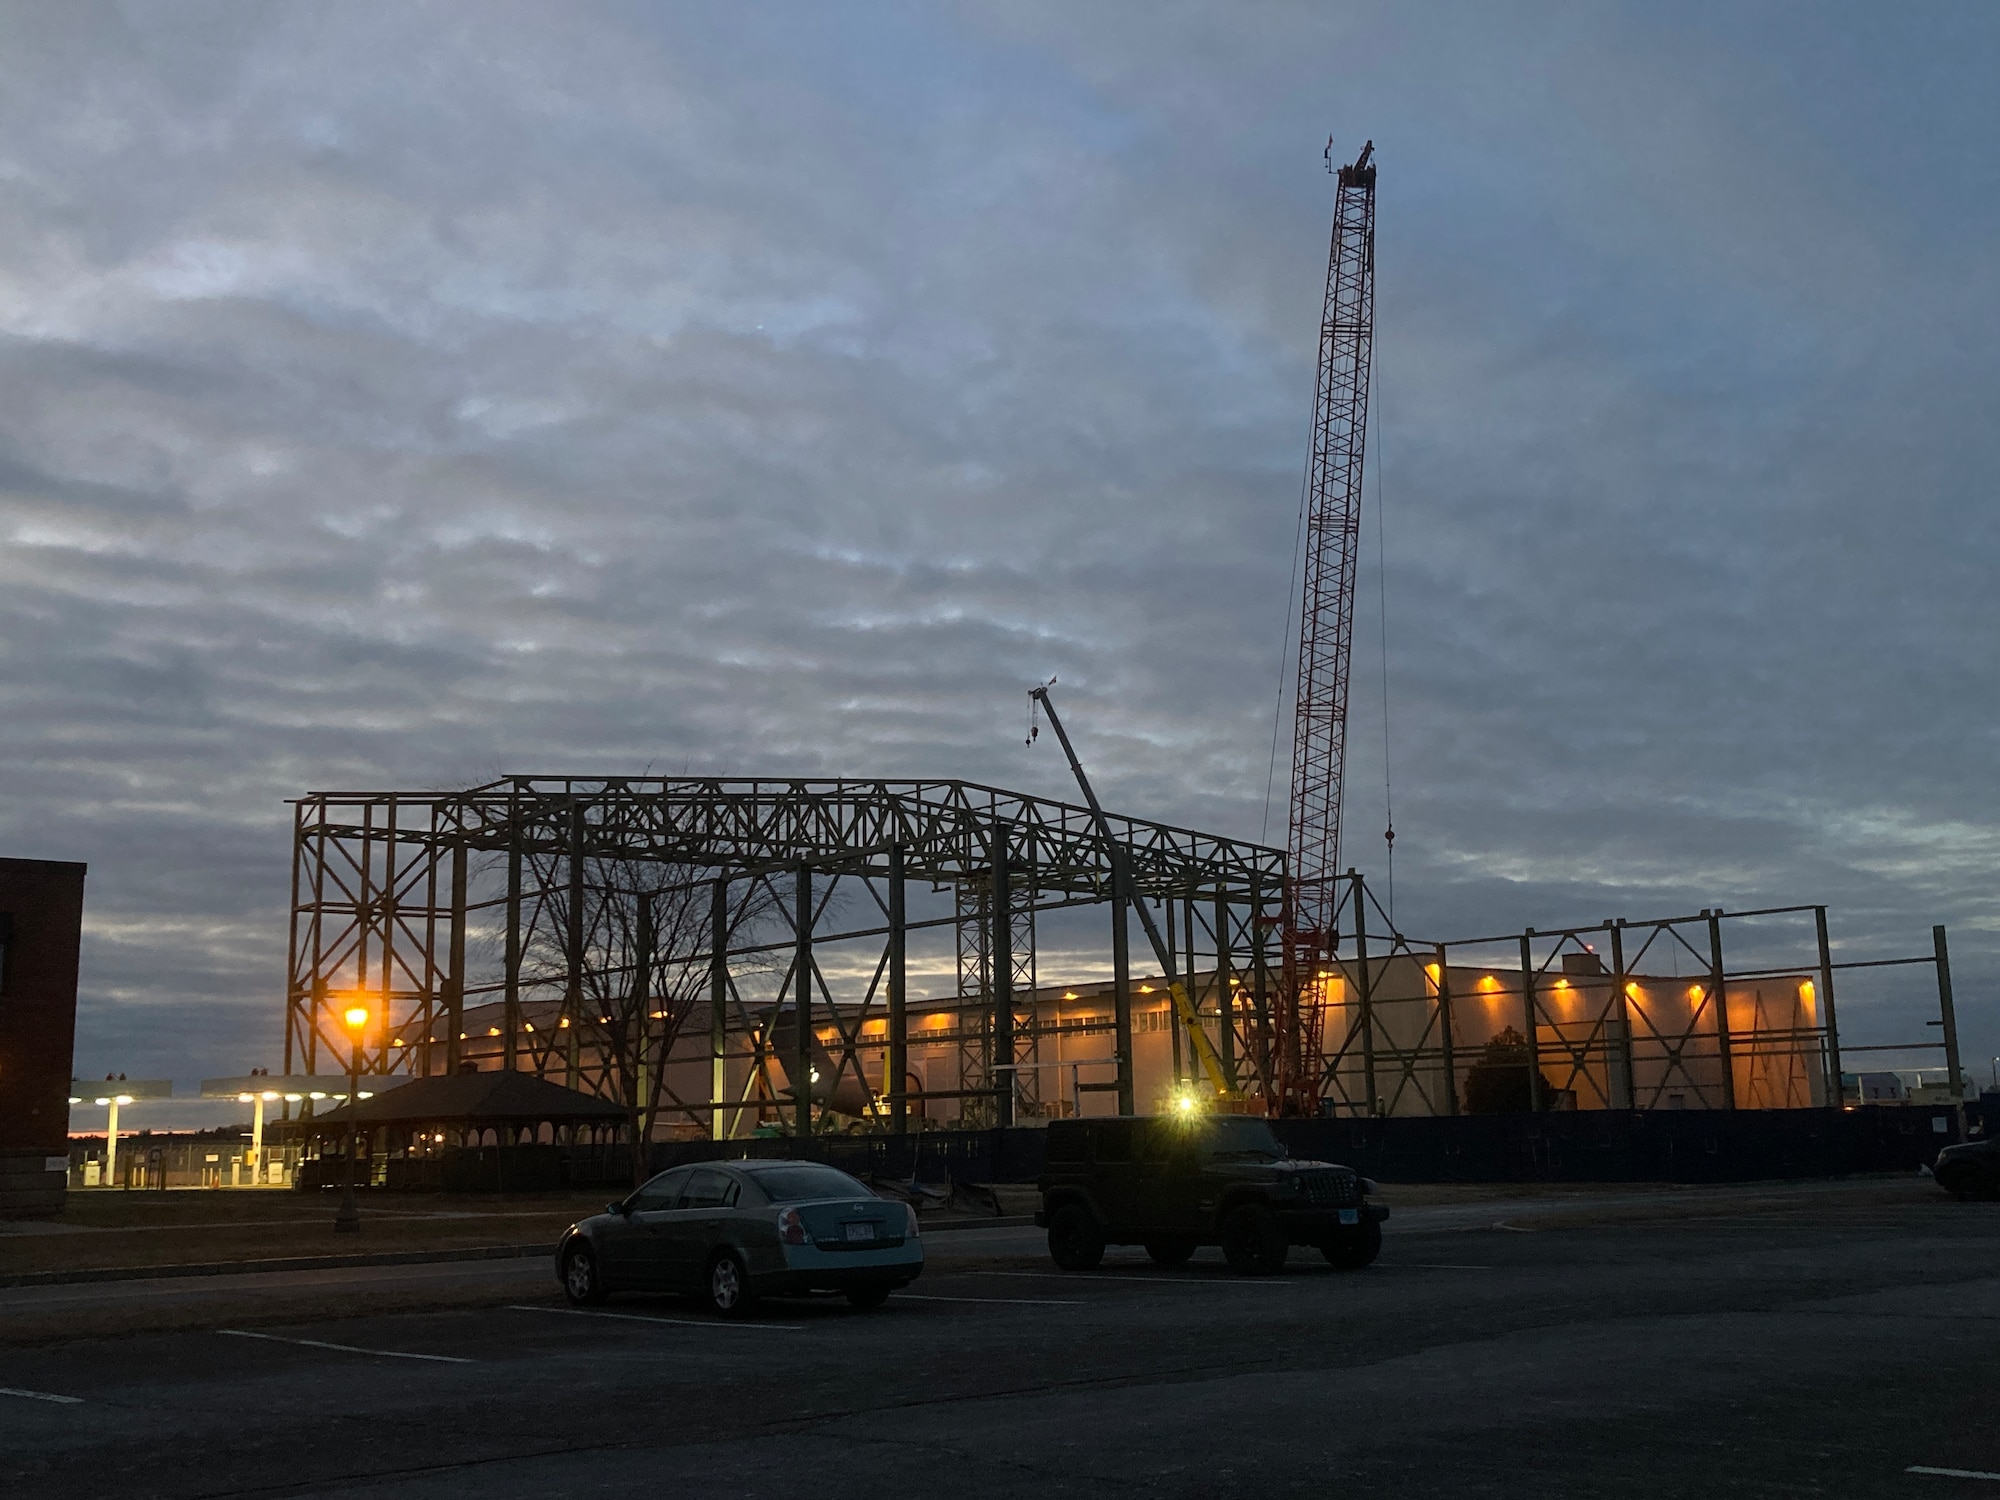 New super hangar rises from the sands of the Pioneer Valley